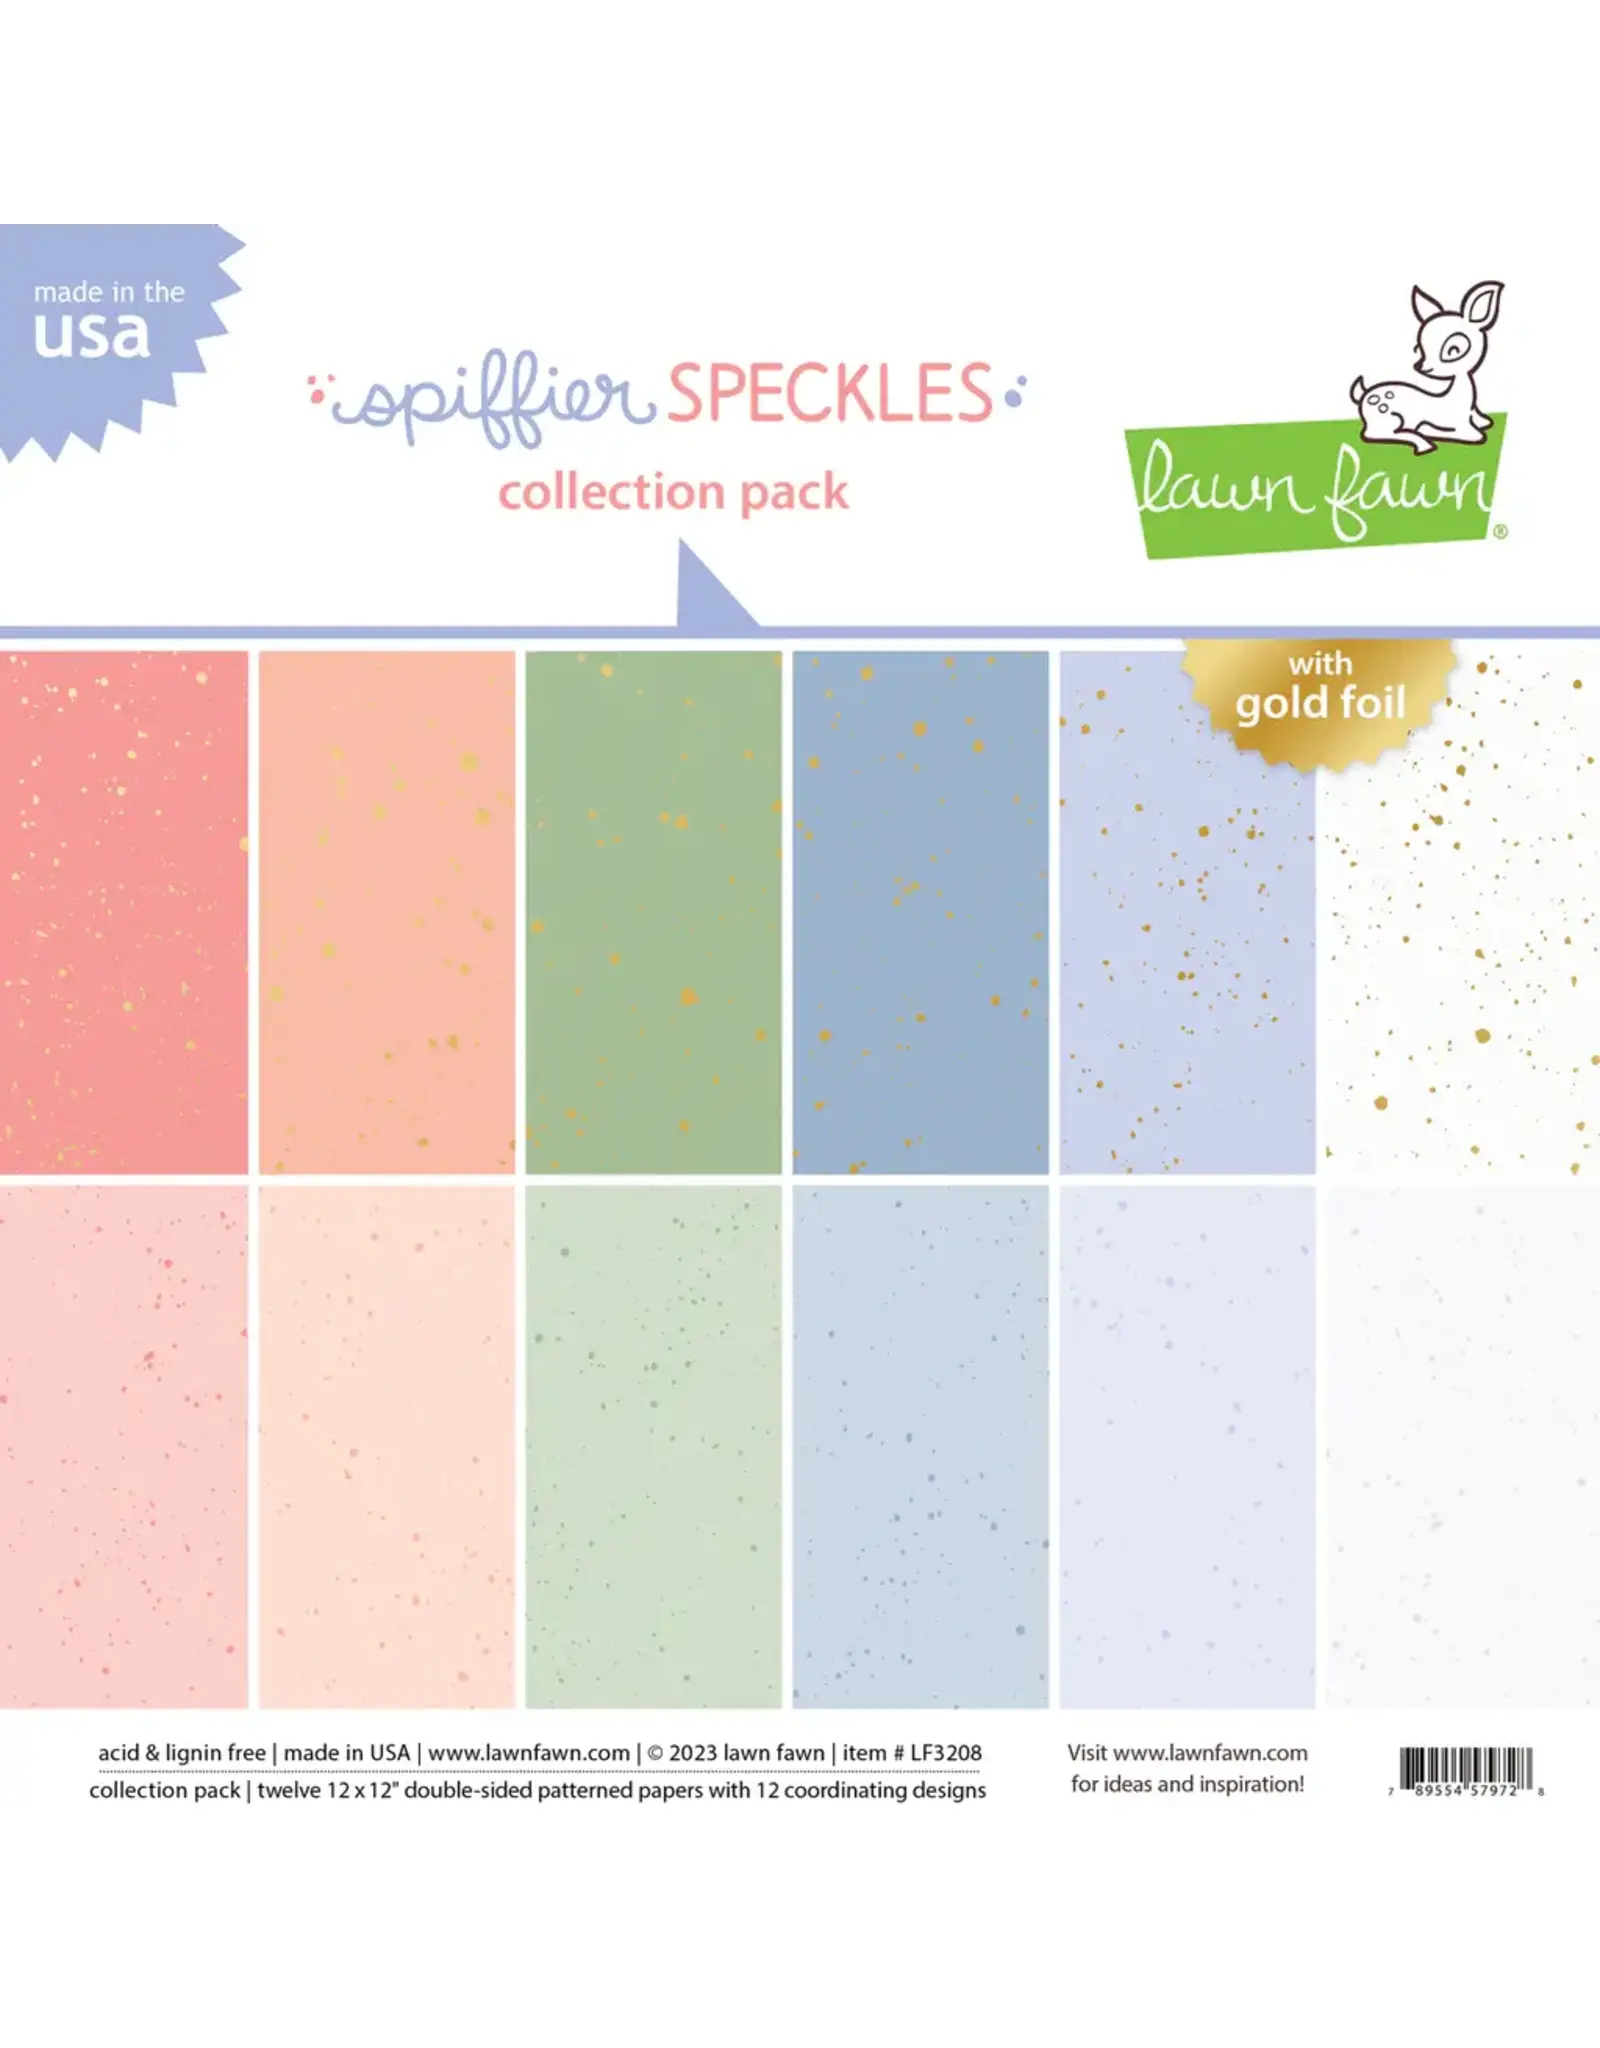 LAWN FAWN LAWN FAWN SPIFFIER SPECKLES 12x12 COLLECTION PACK 12 SHEETS